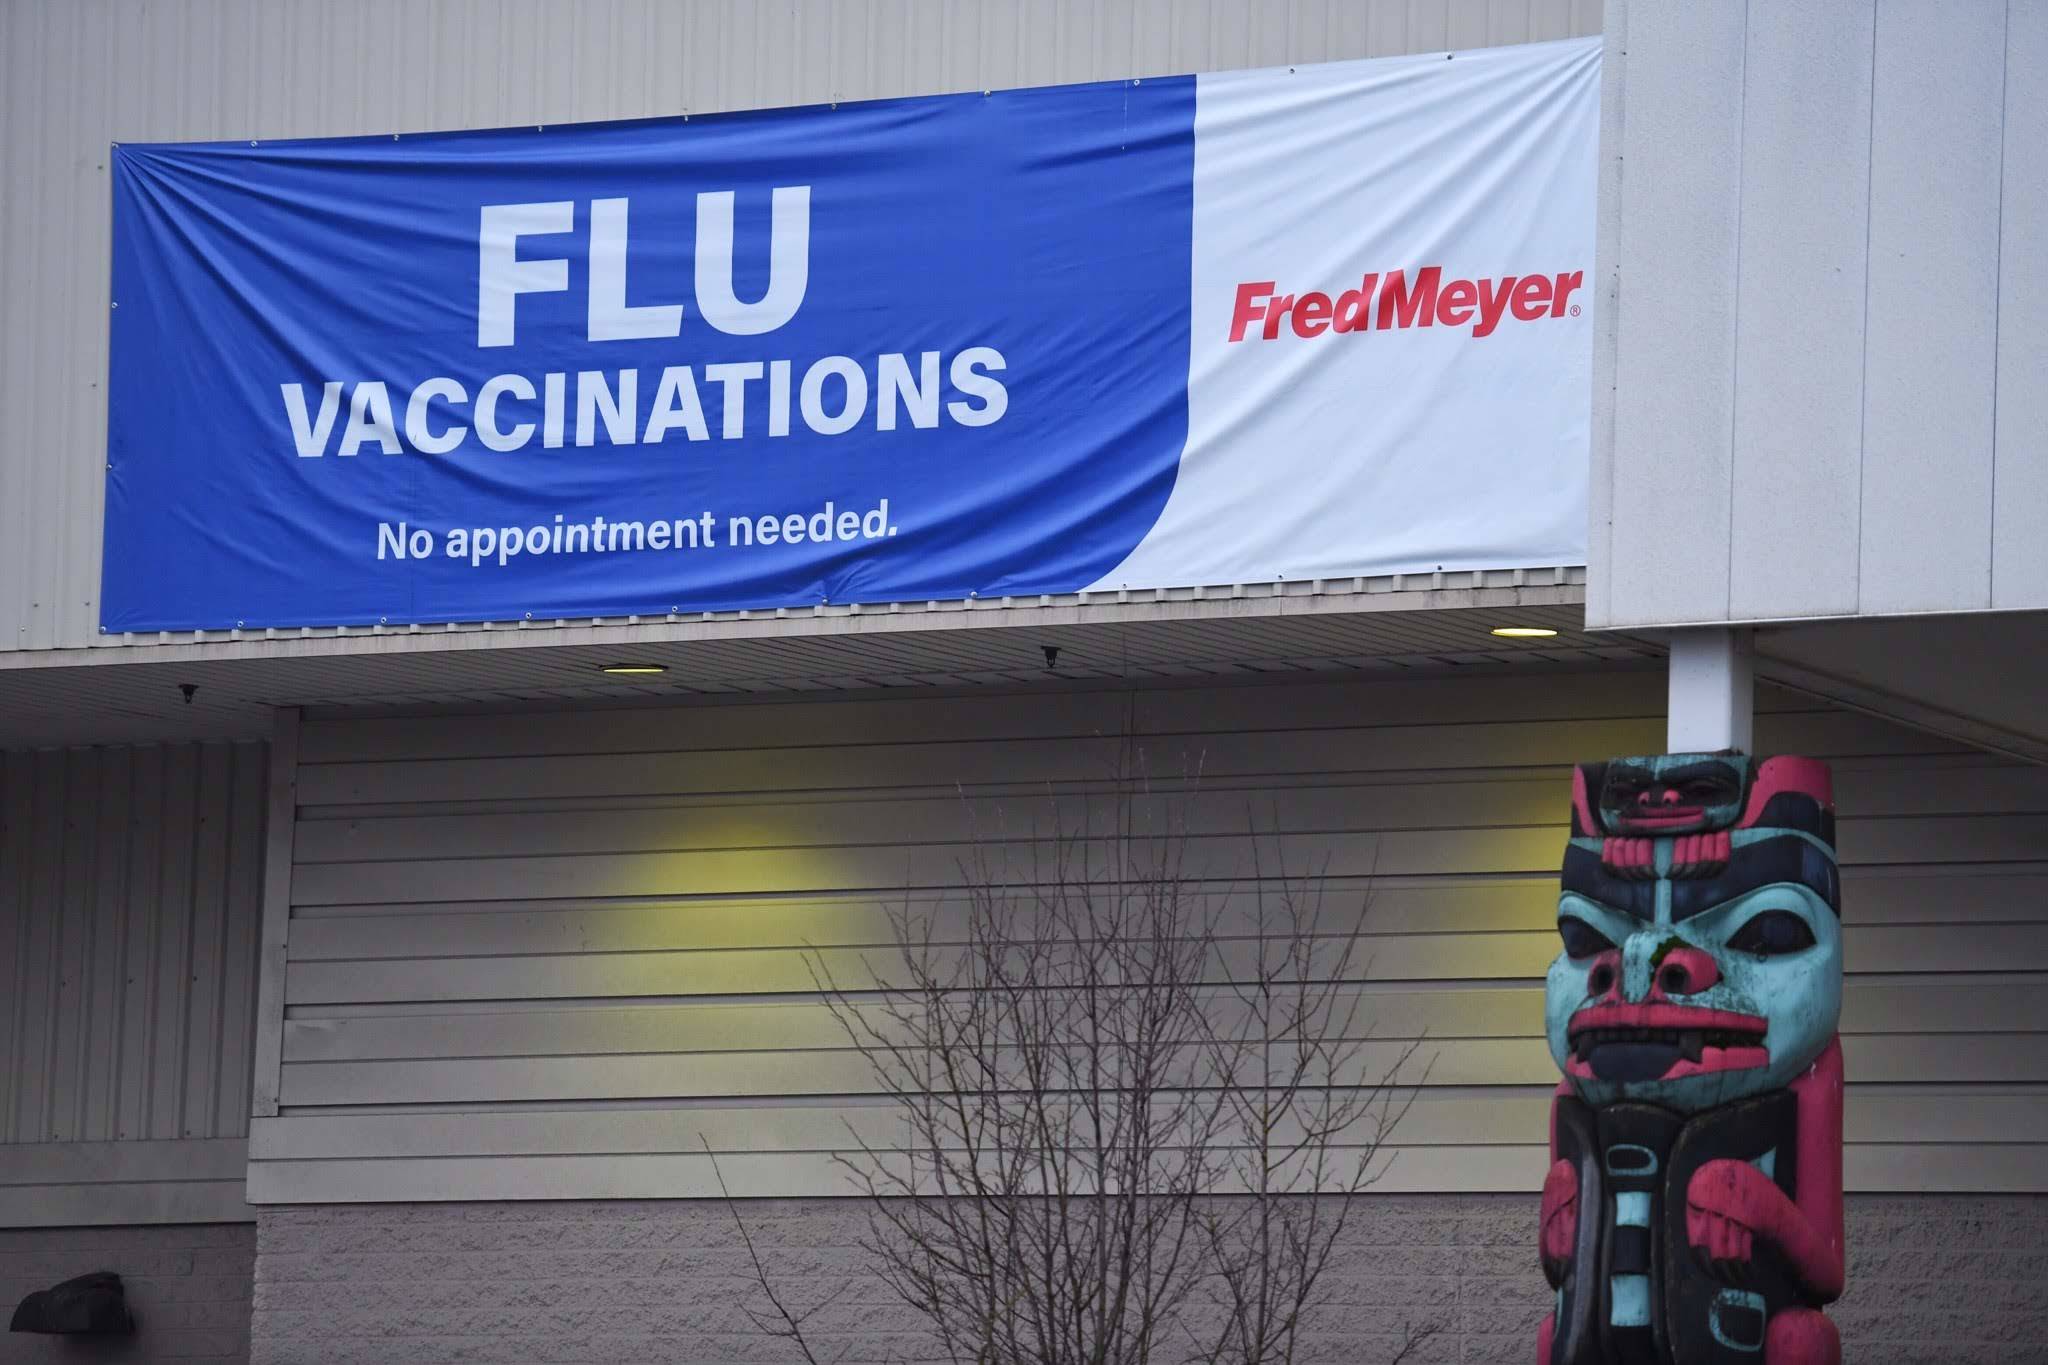 Fred Meyer advertises flu vaccinations via a banner outside its pharmacy on Wednesday, Dec. 11, 2019. (Michael Penn | Juneau Empire)